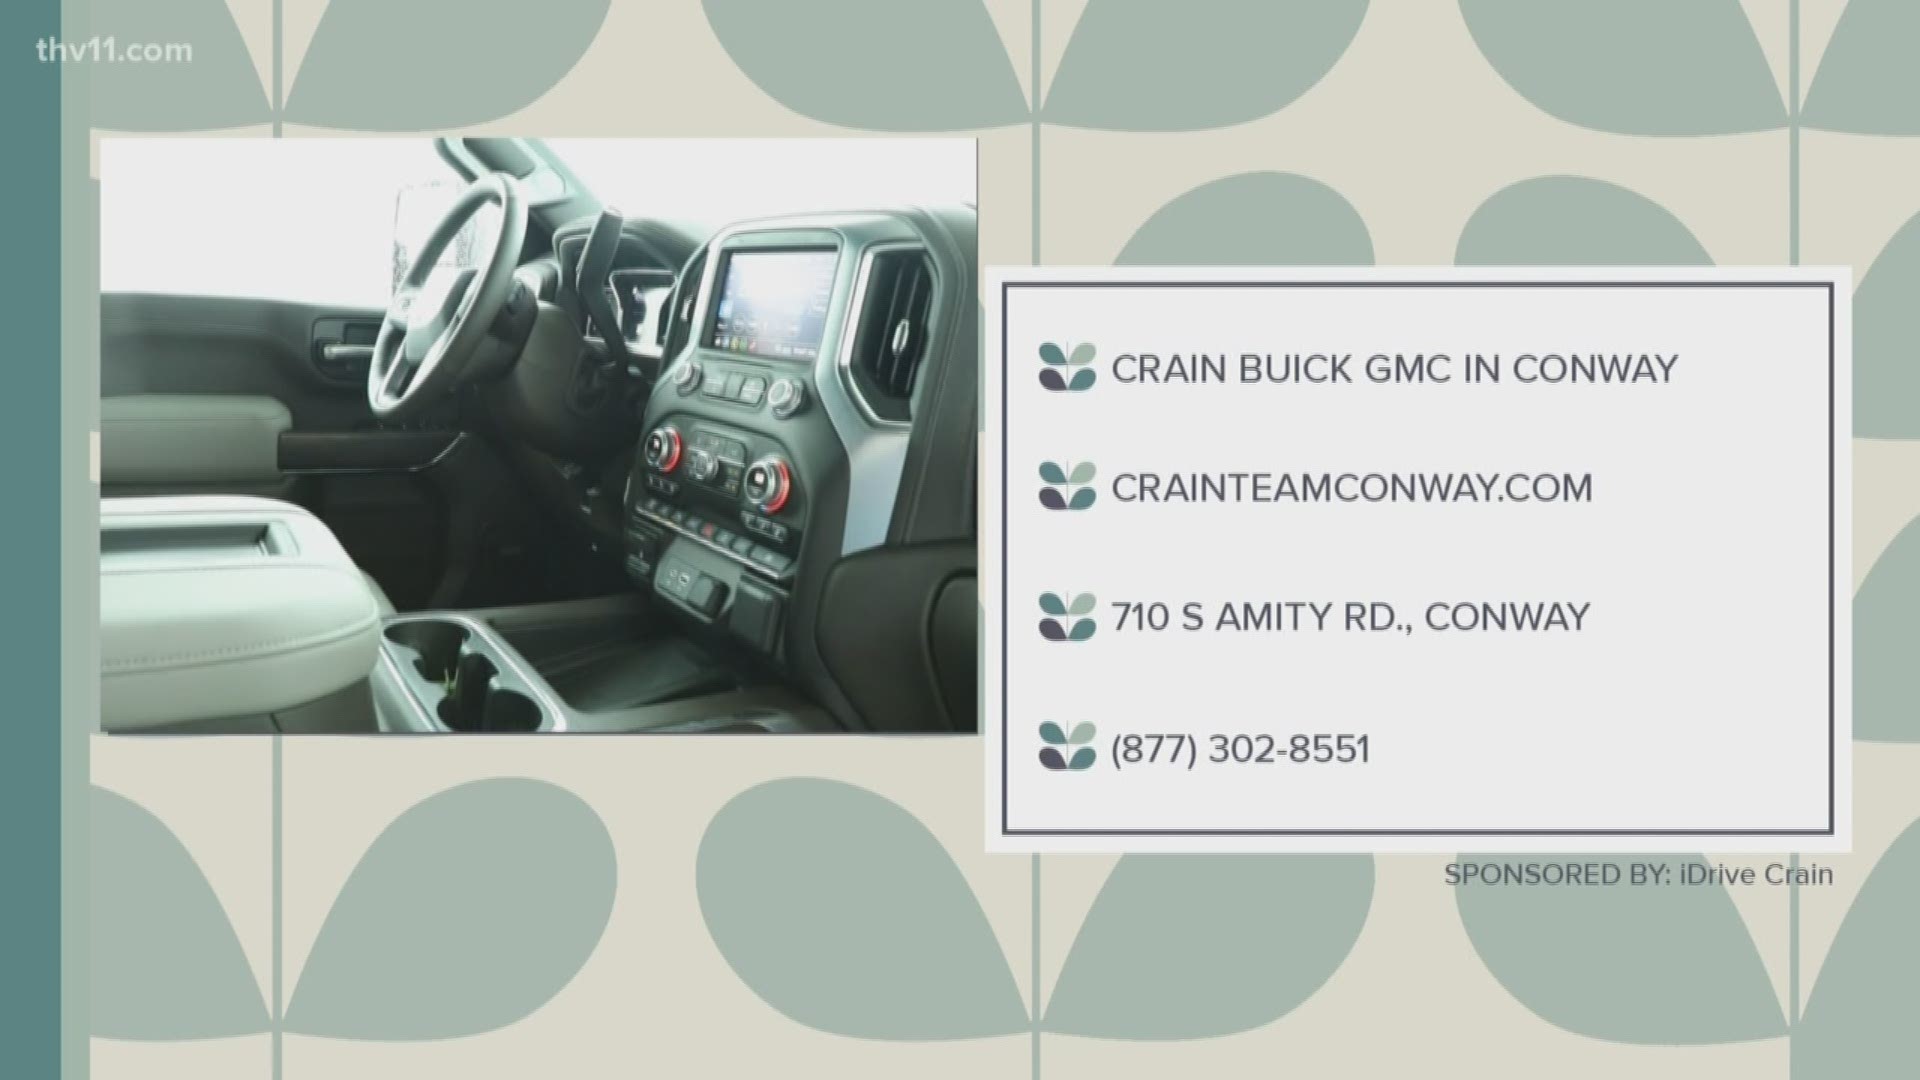 Crain Buick GMC is located at 710 South Amity Road in Conway.